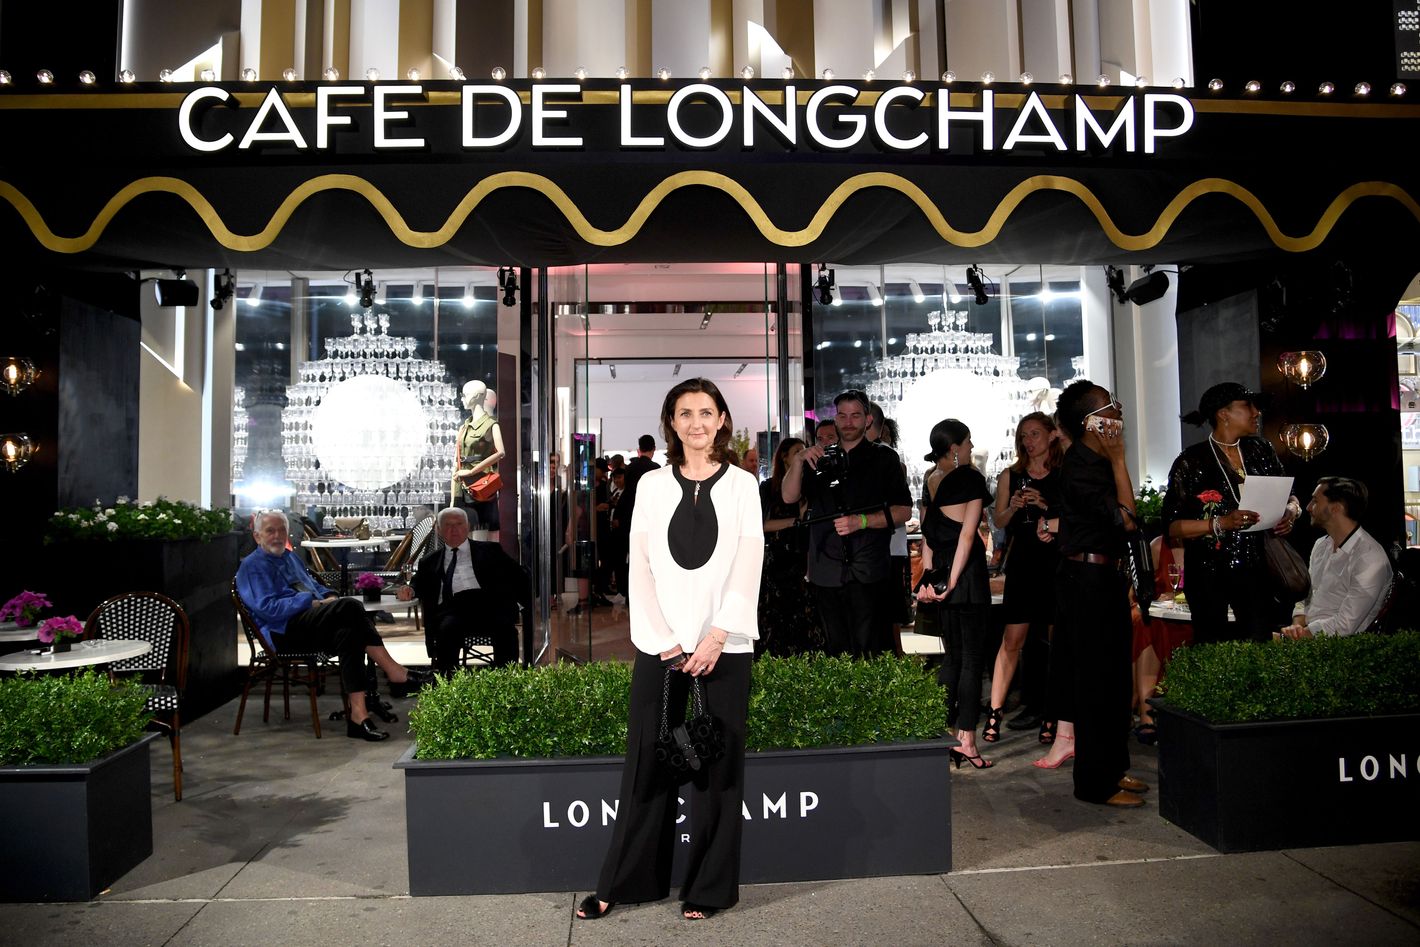 Long time coming: French luxury brand Longchamp sets up shop in